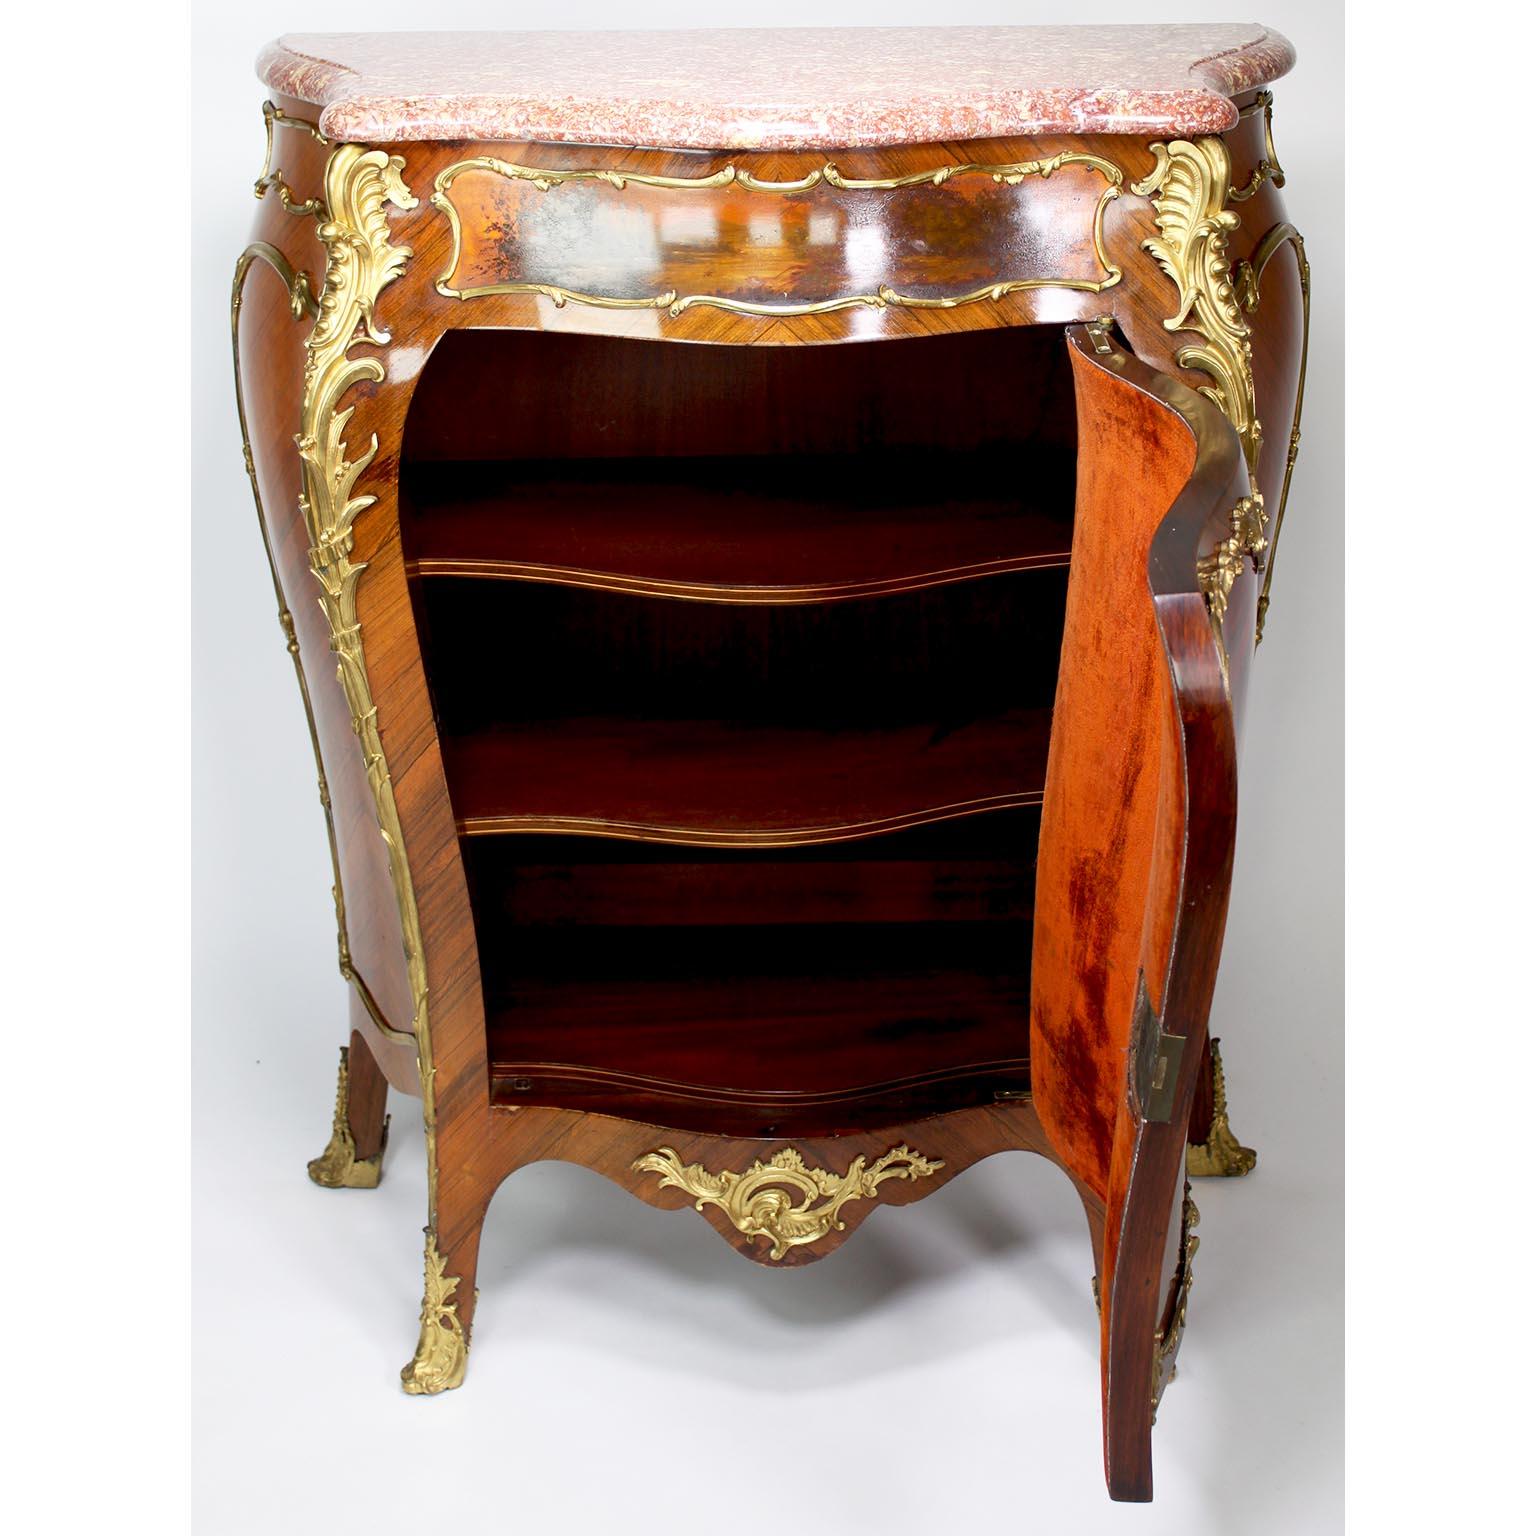 French 19th Century Louis XV Style Ormolu Mounted Kingwood Vernis-Martin Cabinet For Sale 3